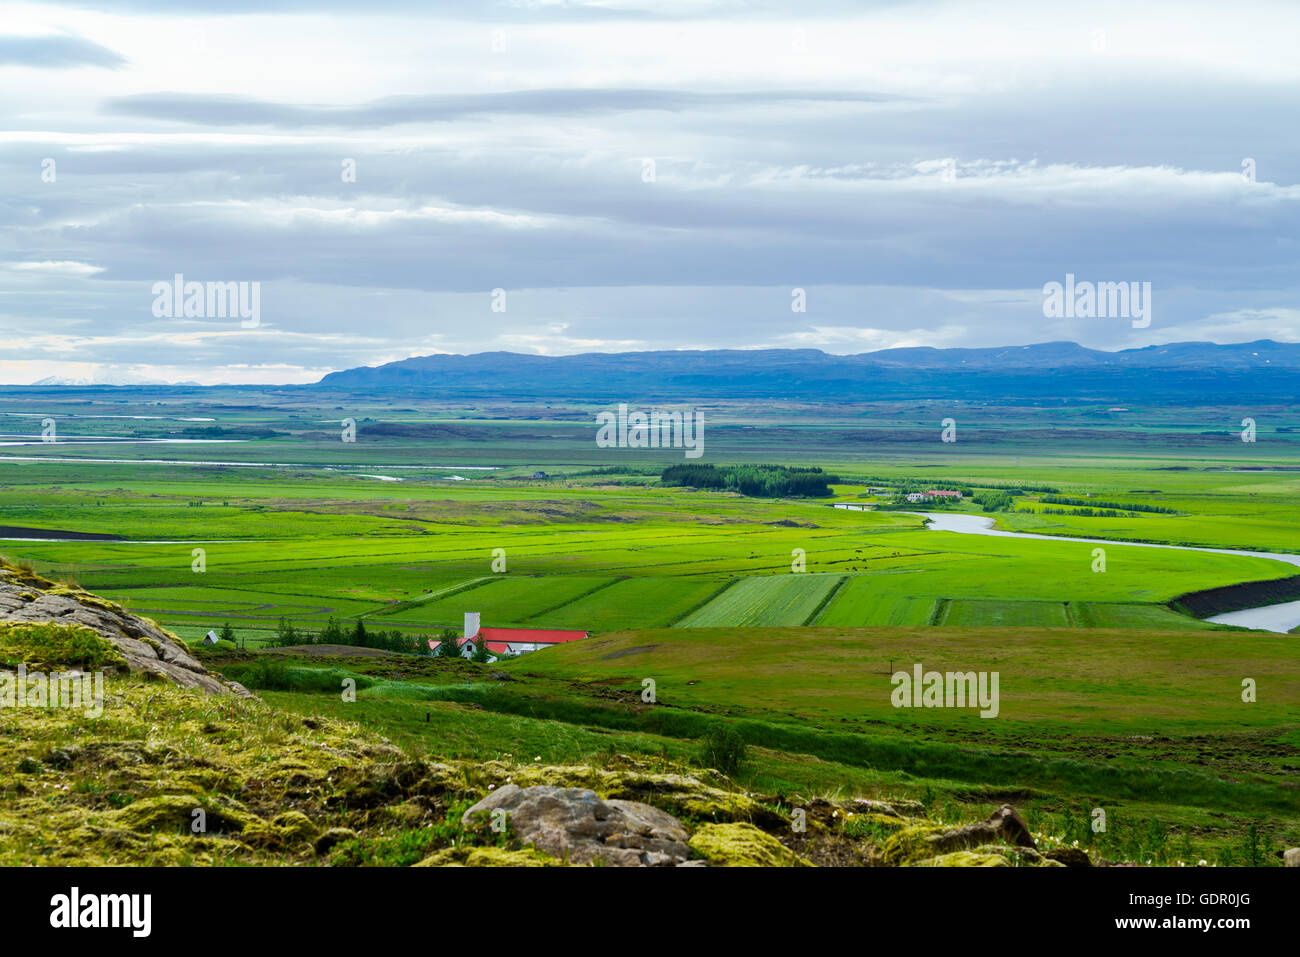 Small village with horses grazing in the green field at Iceland landscape Stock Photo